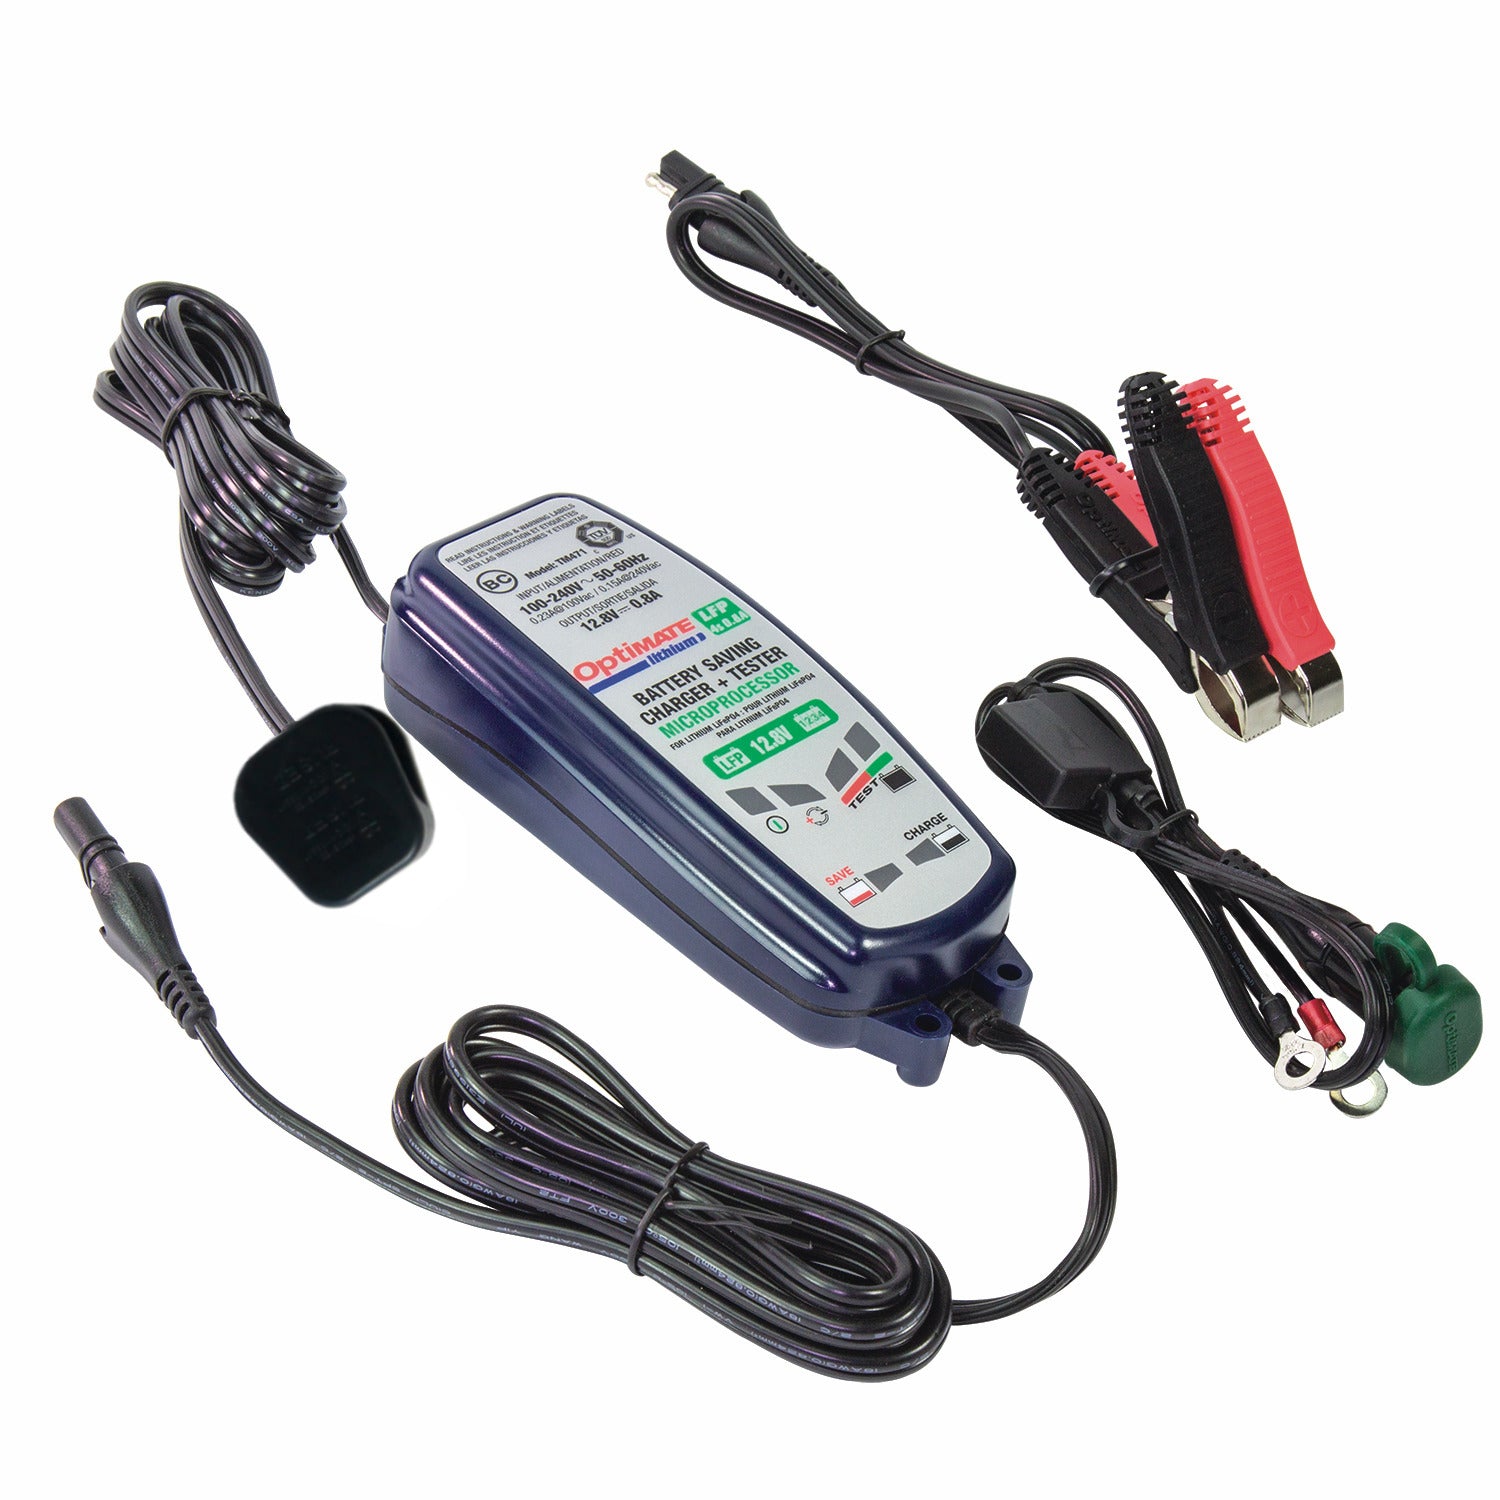 Optimate Lithium 0.8A 12.8V Battery Charger and Optimiser